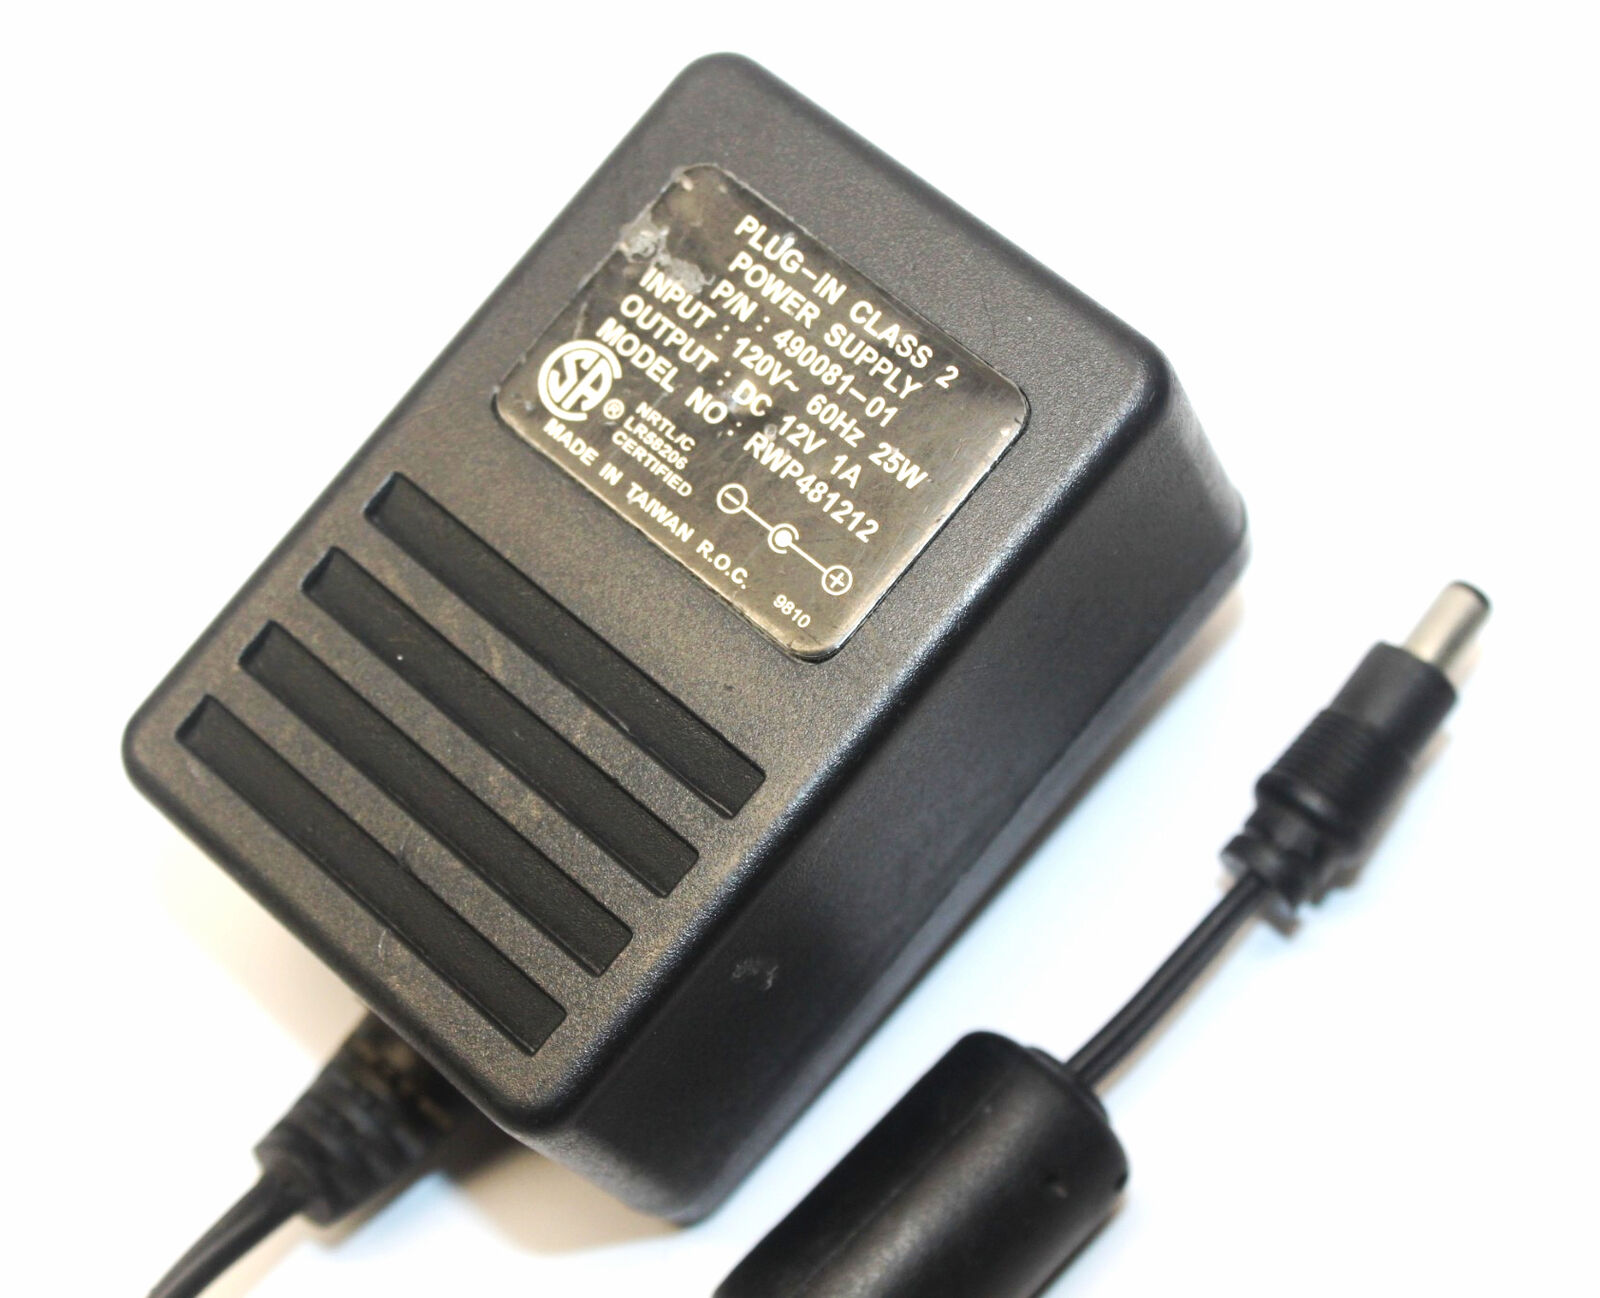 *Brand NEW*RWP481212 Plug-In Class 2 Transformer Output DC 12V 1A AC Adapter POWER Supply